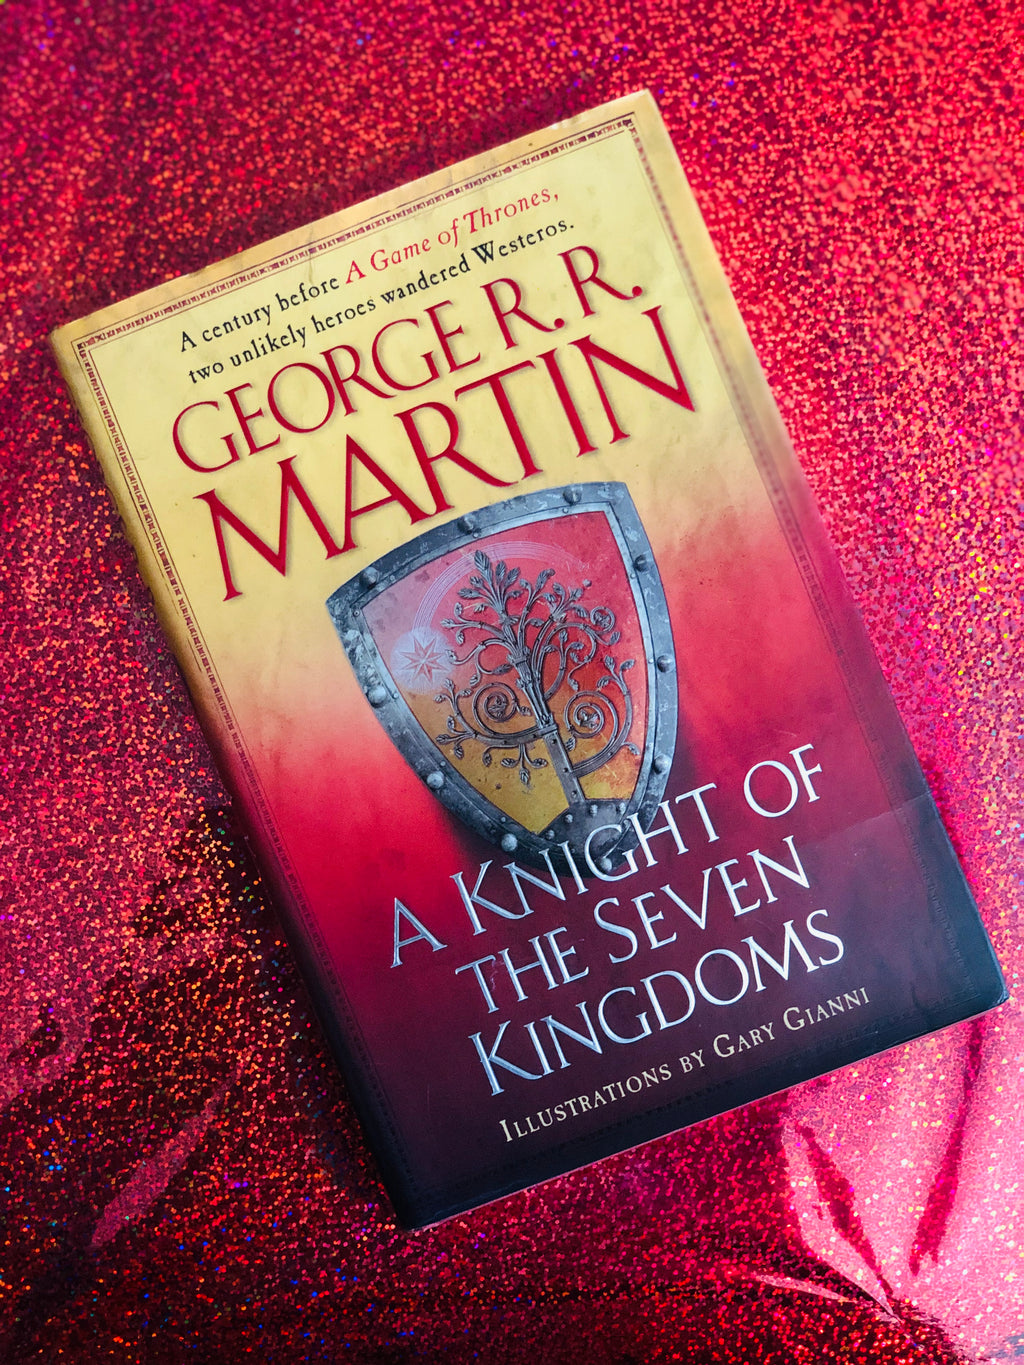 A Knight Of The Seven Kingdoms- By George R.R. Martin